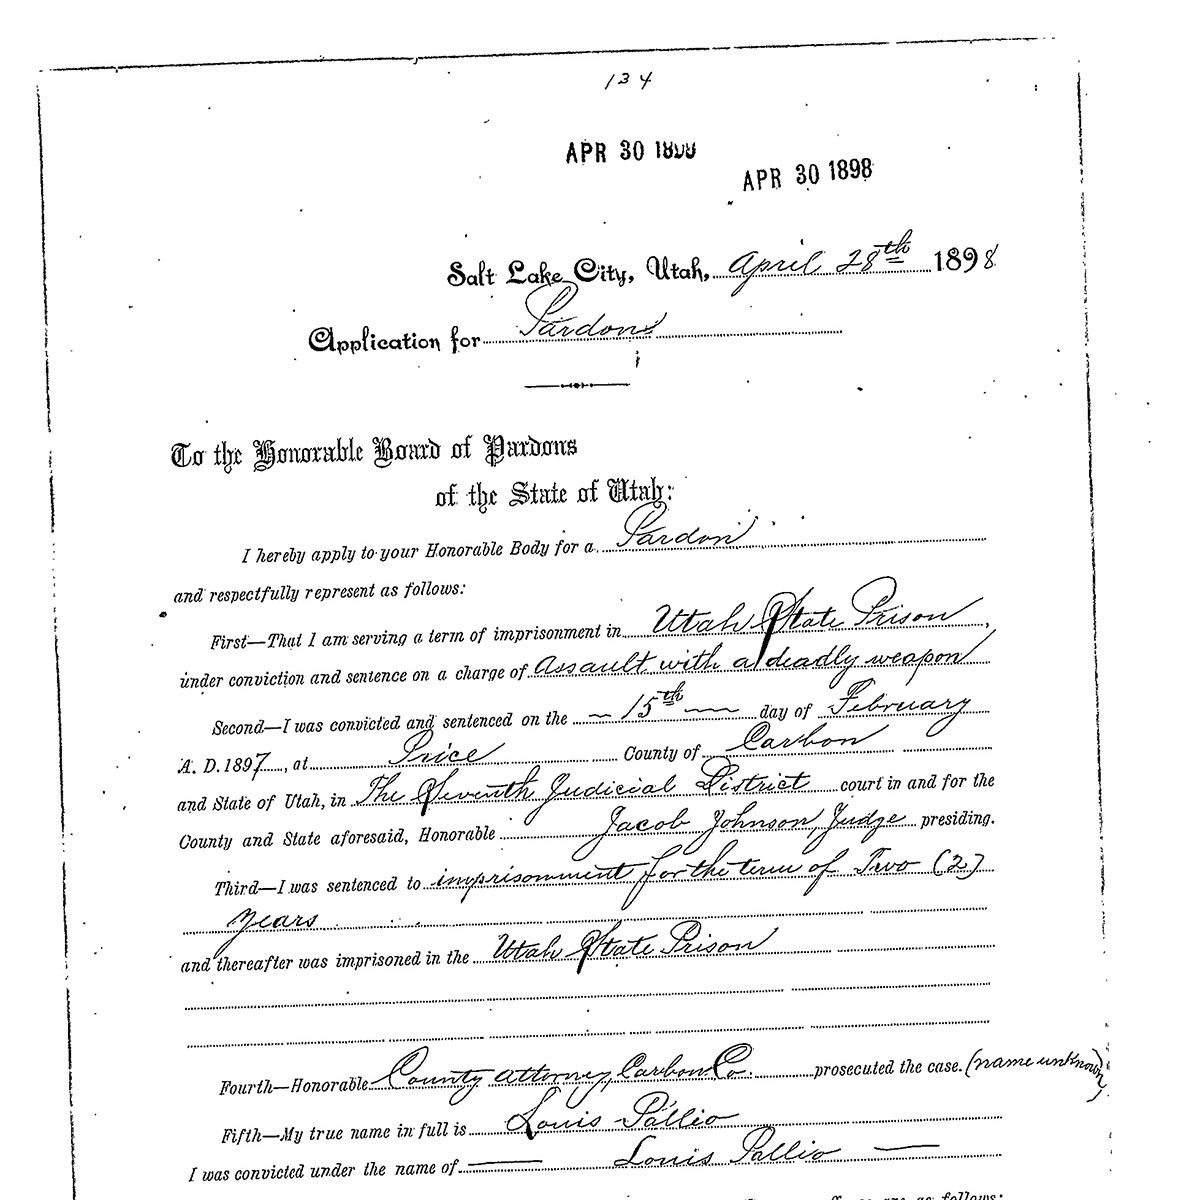 Part of a document for a prisoner applying for a pardon